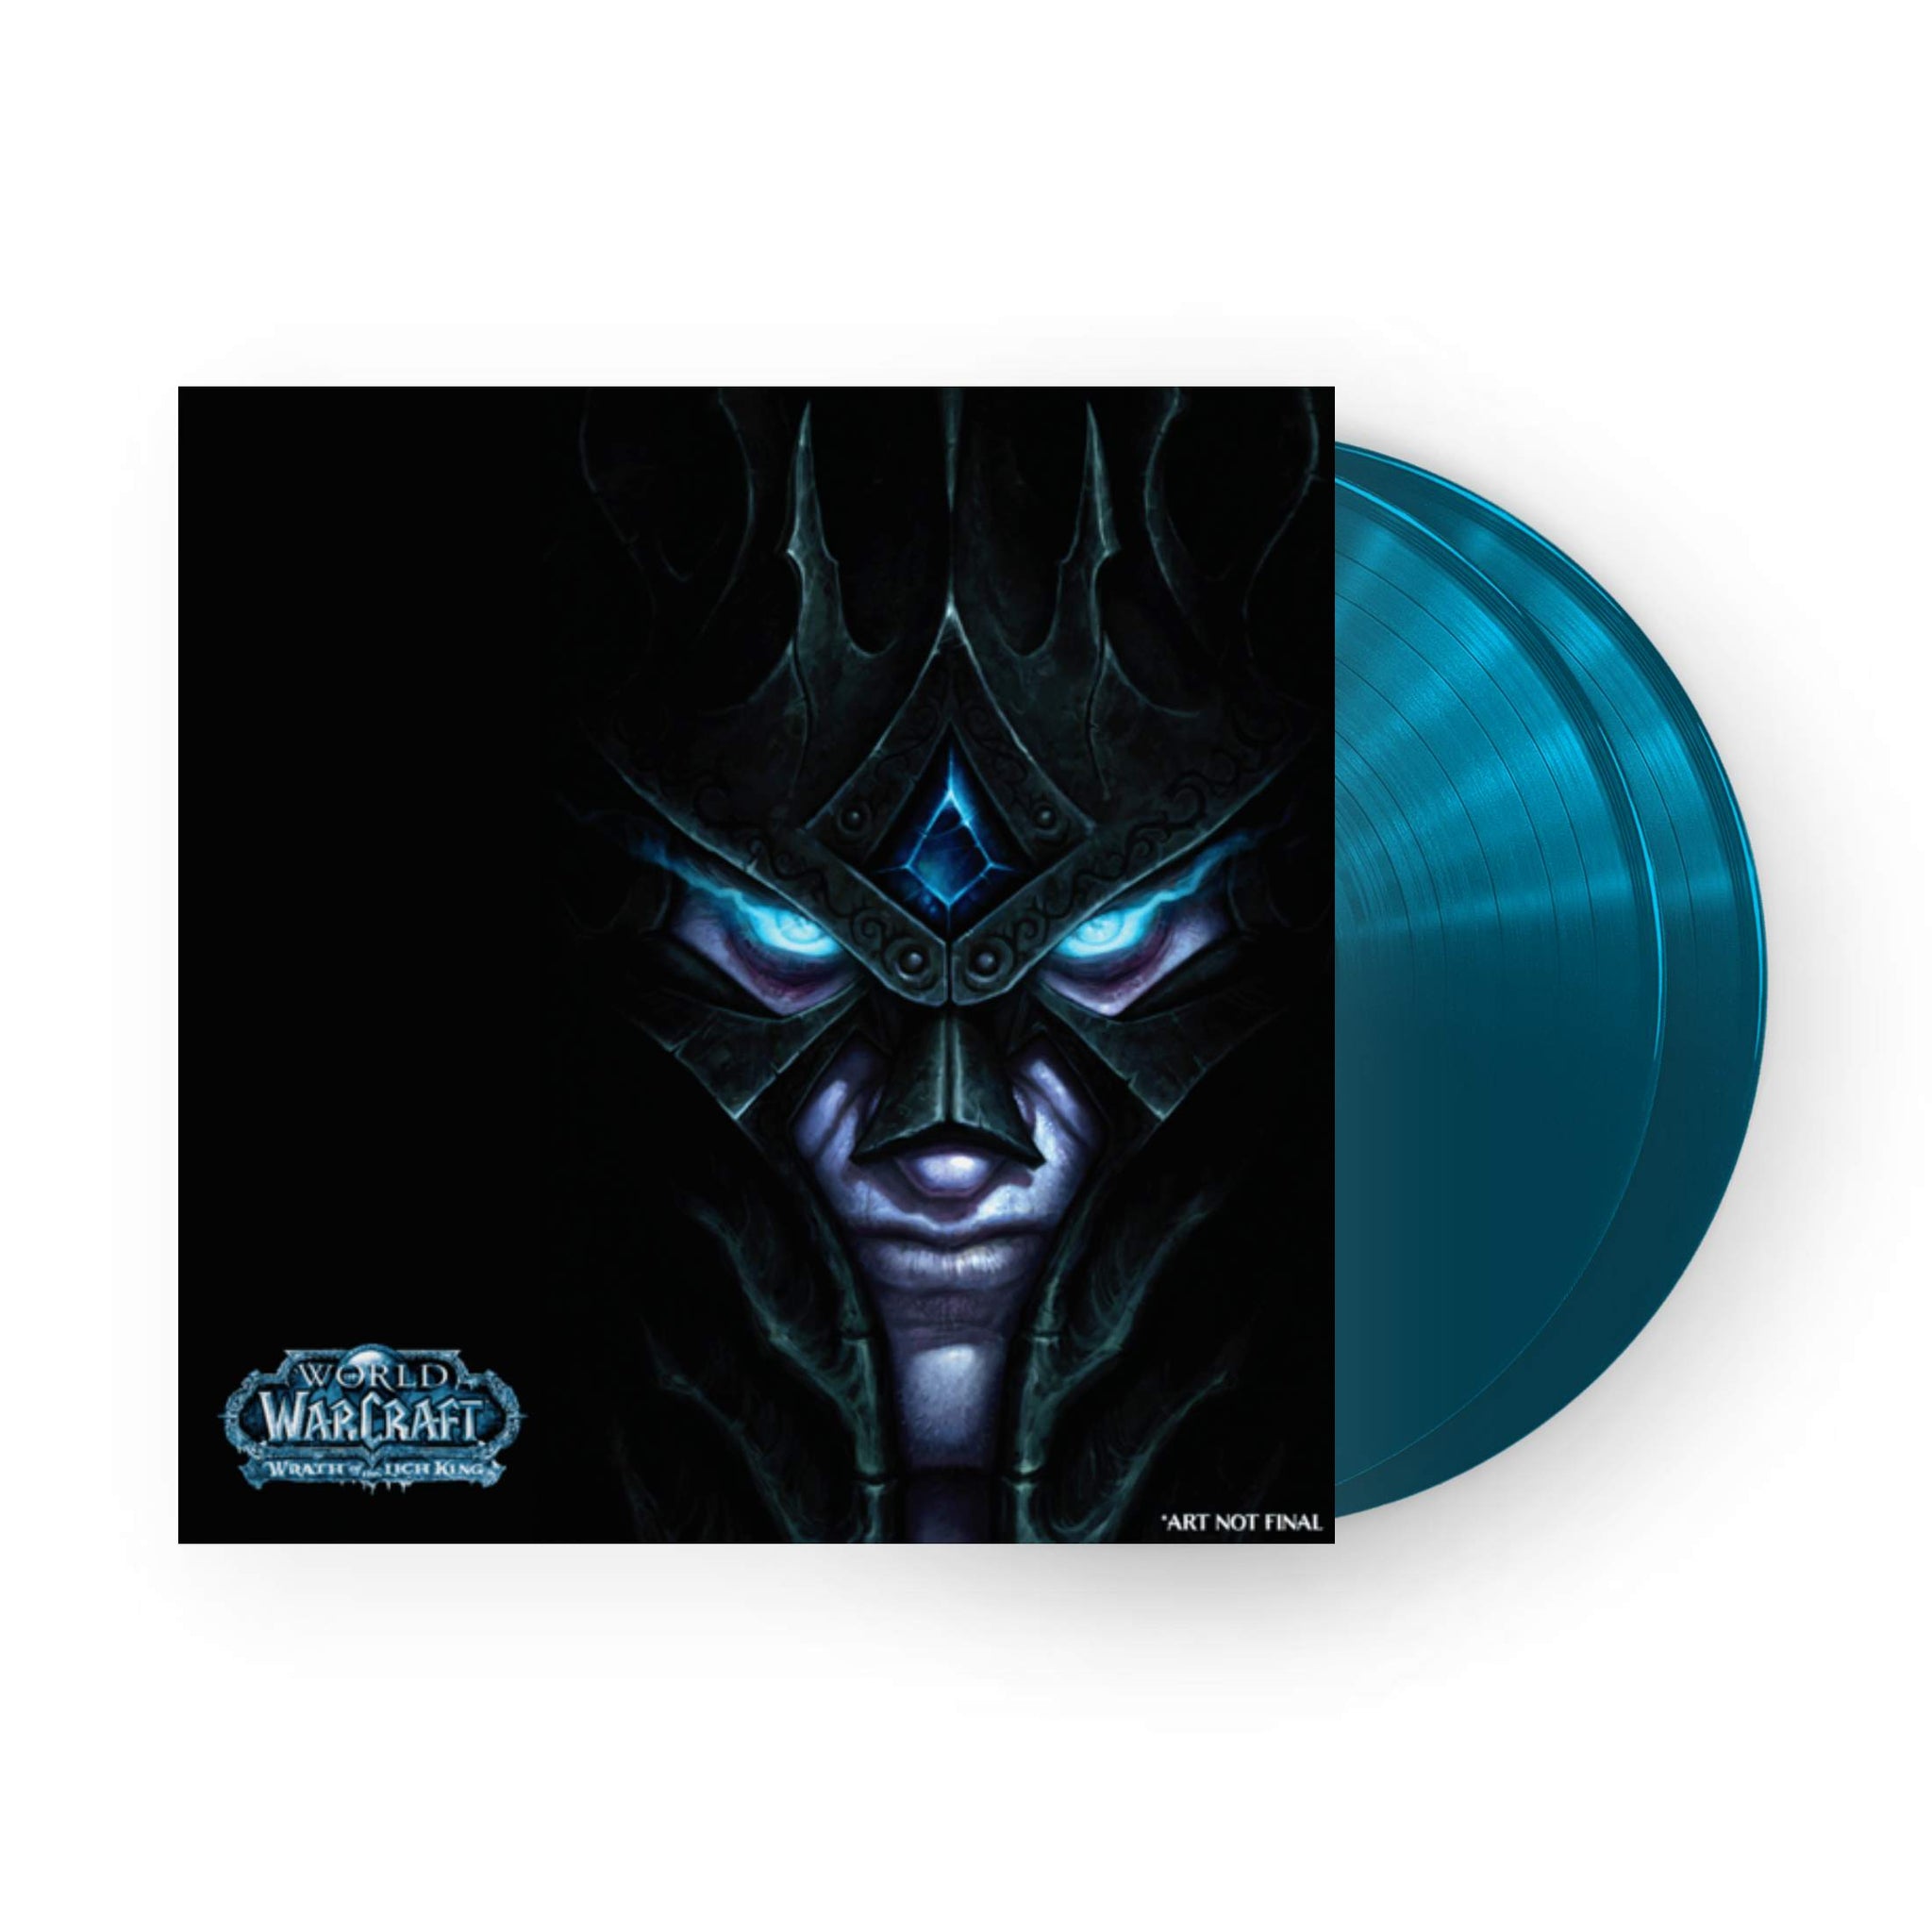 World of Warcraft: Wrath of the Lich King Soundtrack 2xLP (Crown Blue Vinyl)